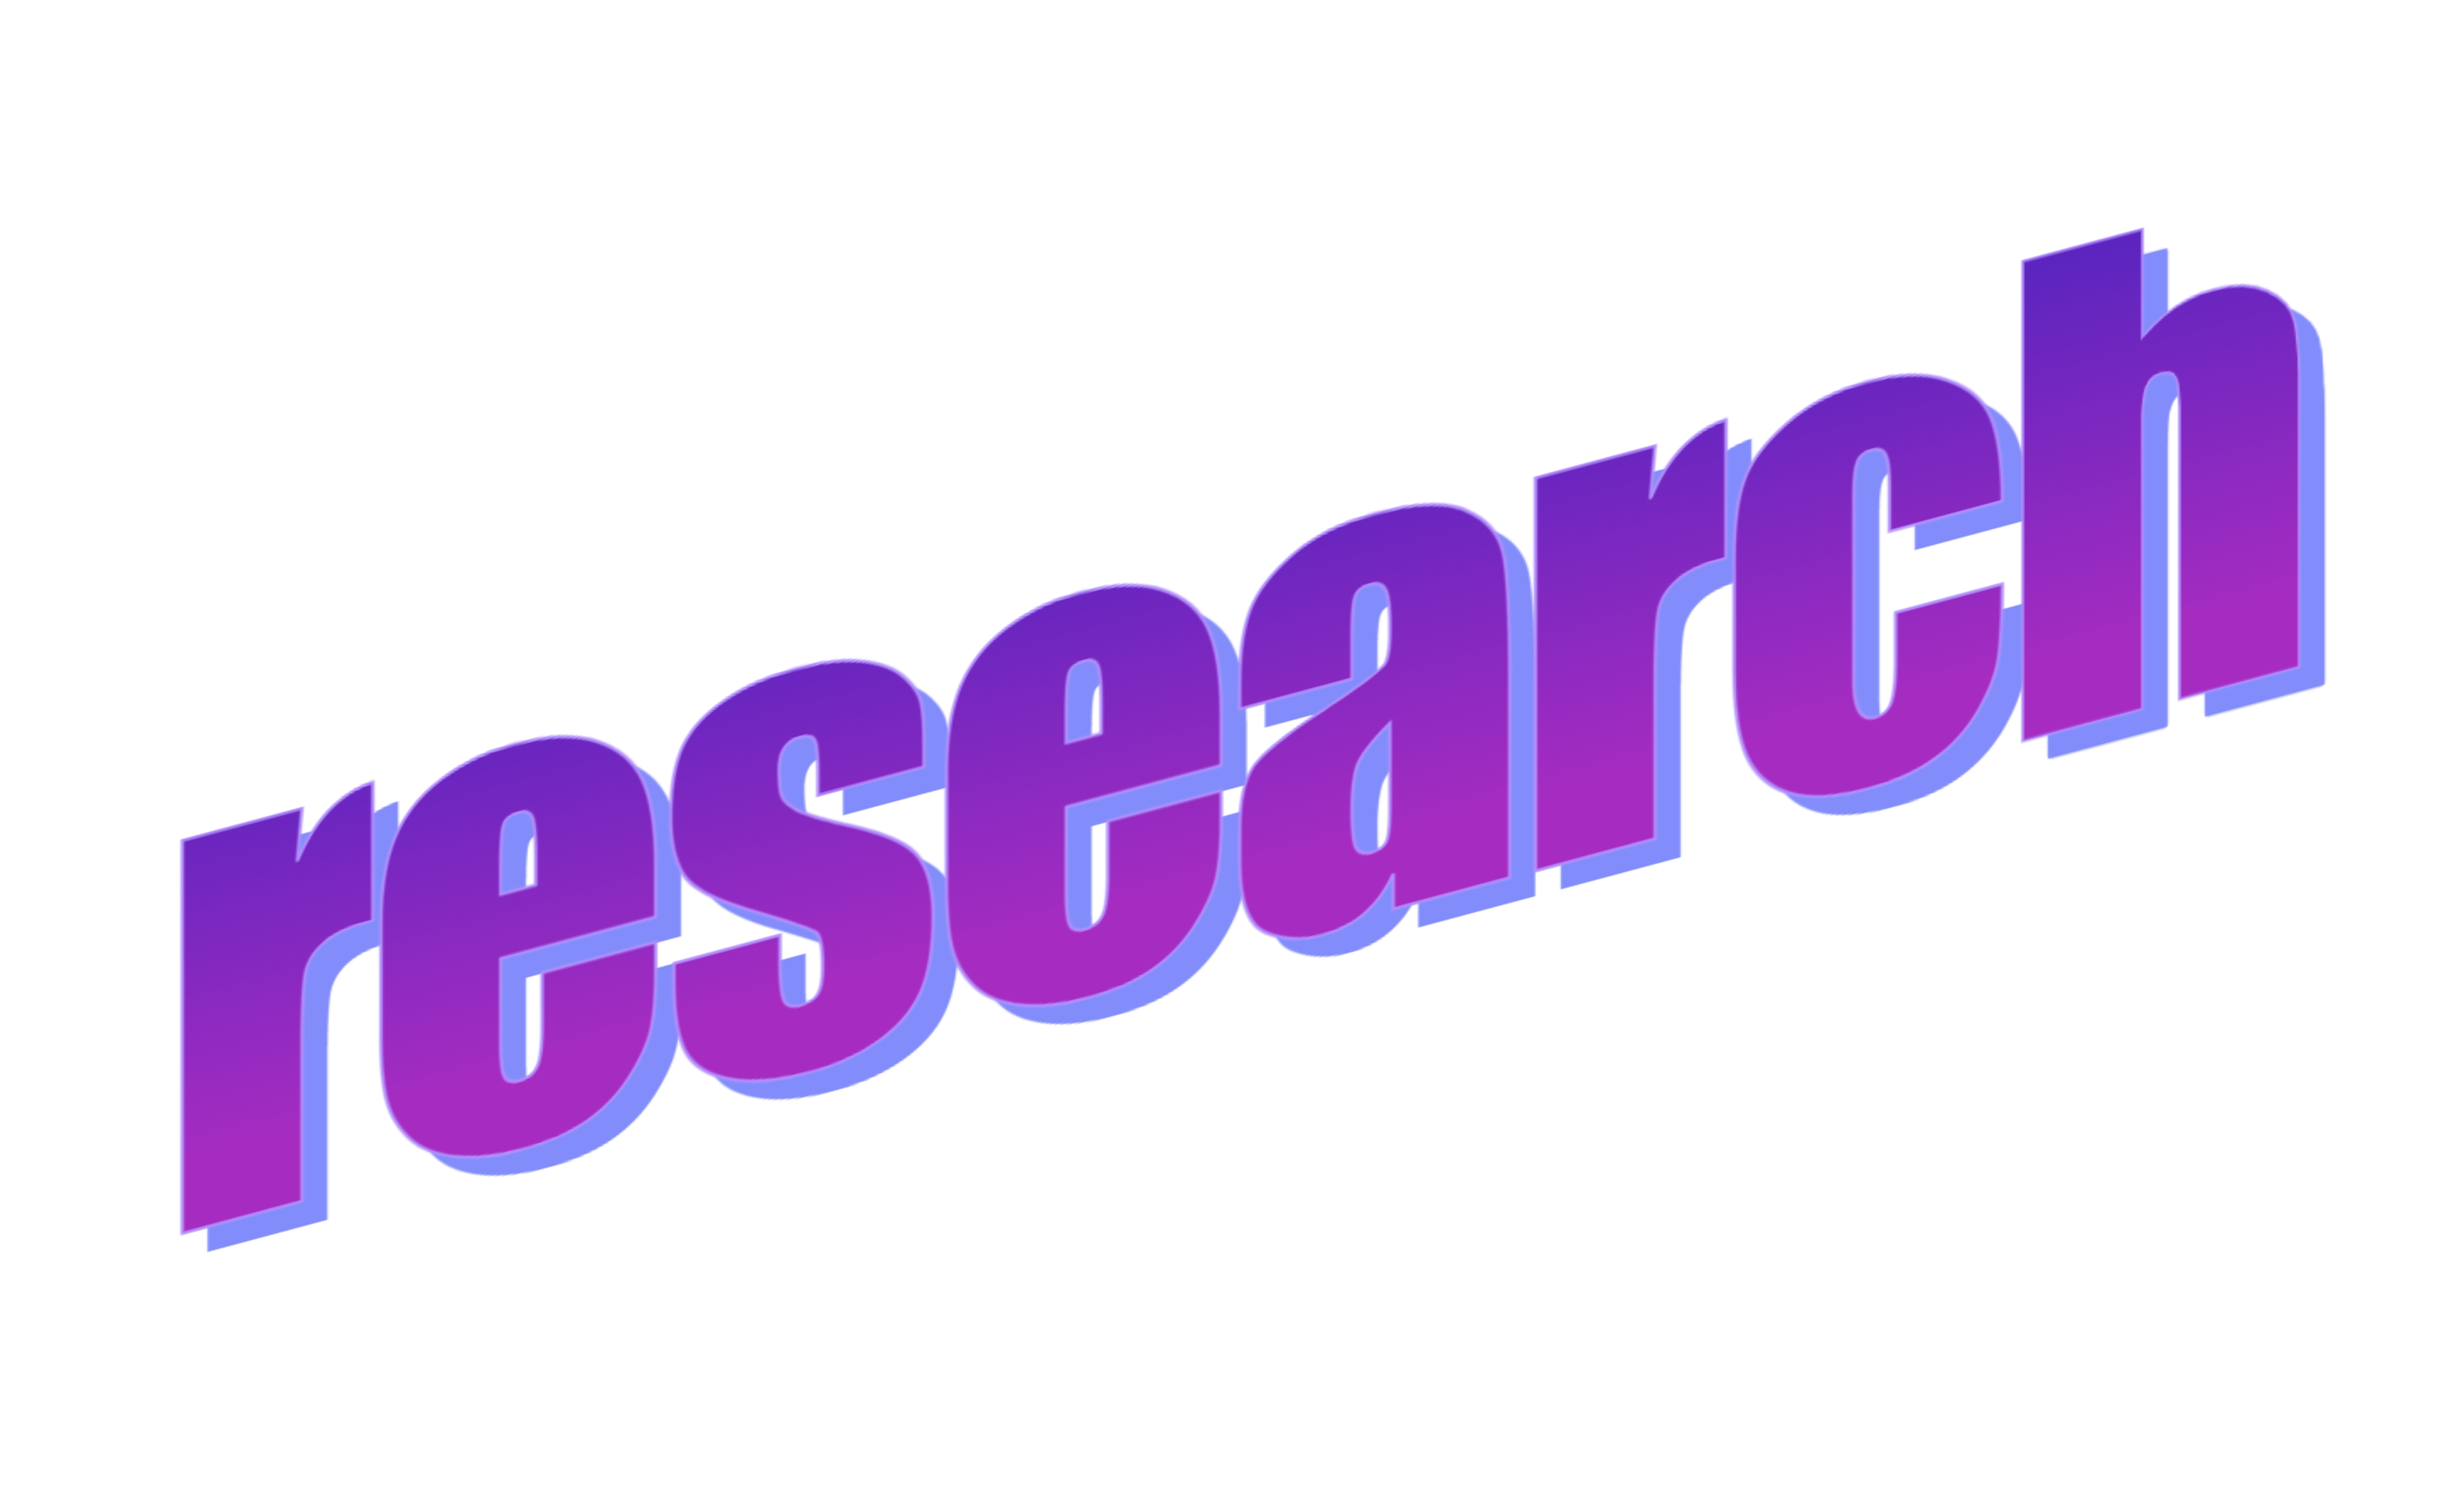 purple word art that says 'research' in all lower case